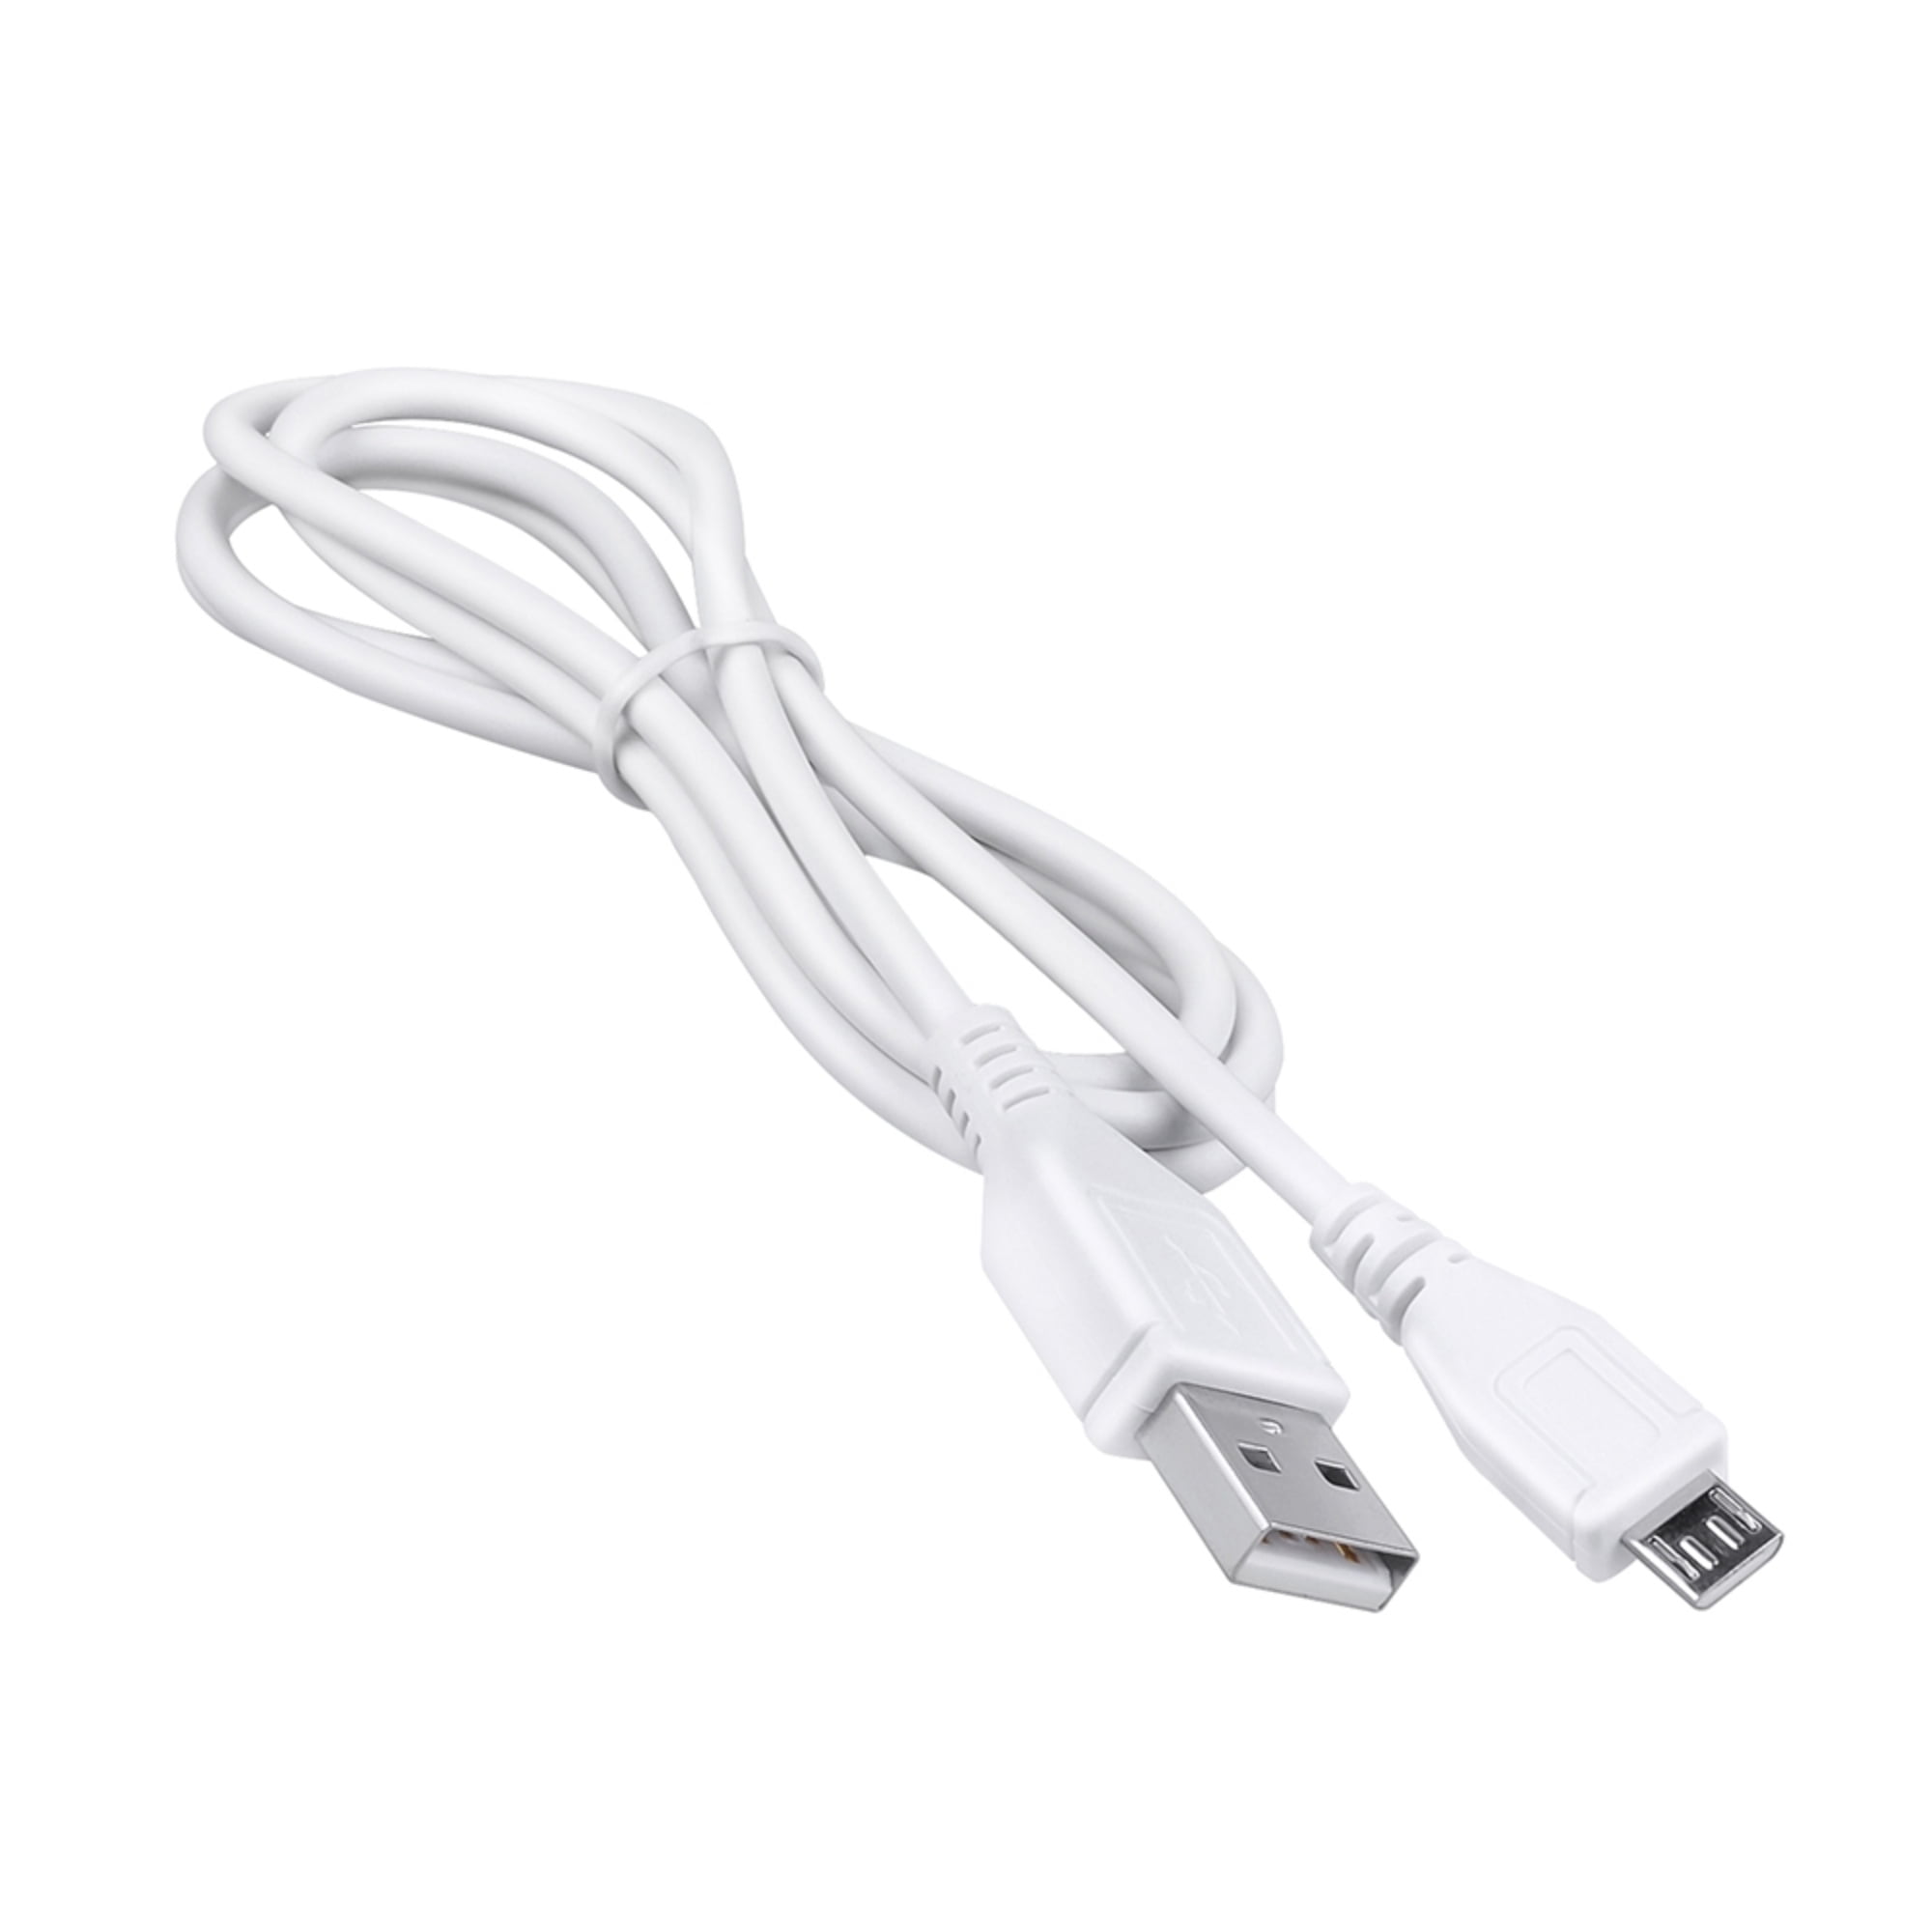 PKPOWER 5ft White Micro USB Charger Cable Cord for Kindle 3 3rd Gen  Generation D00901, Voyage 